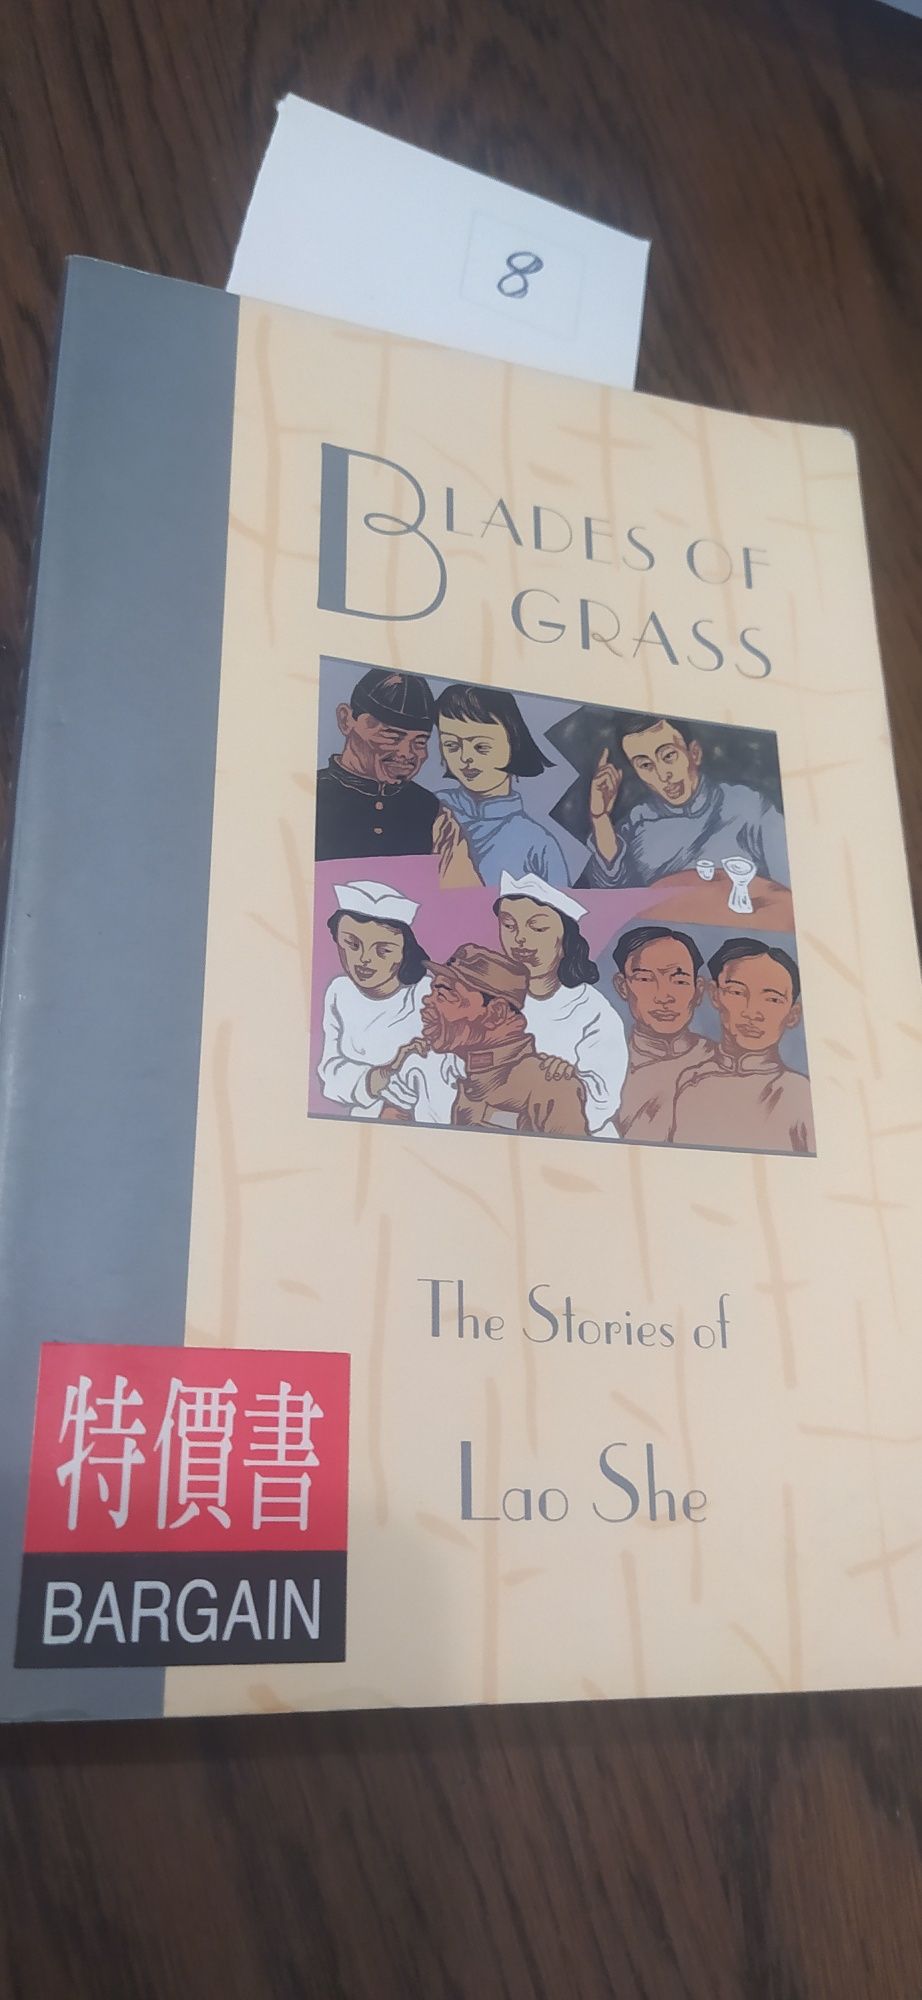 Blades Of Grass The Stories of Lao She